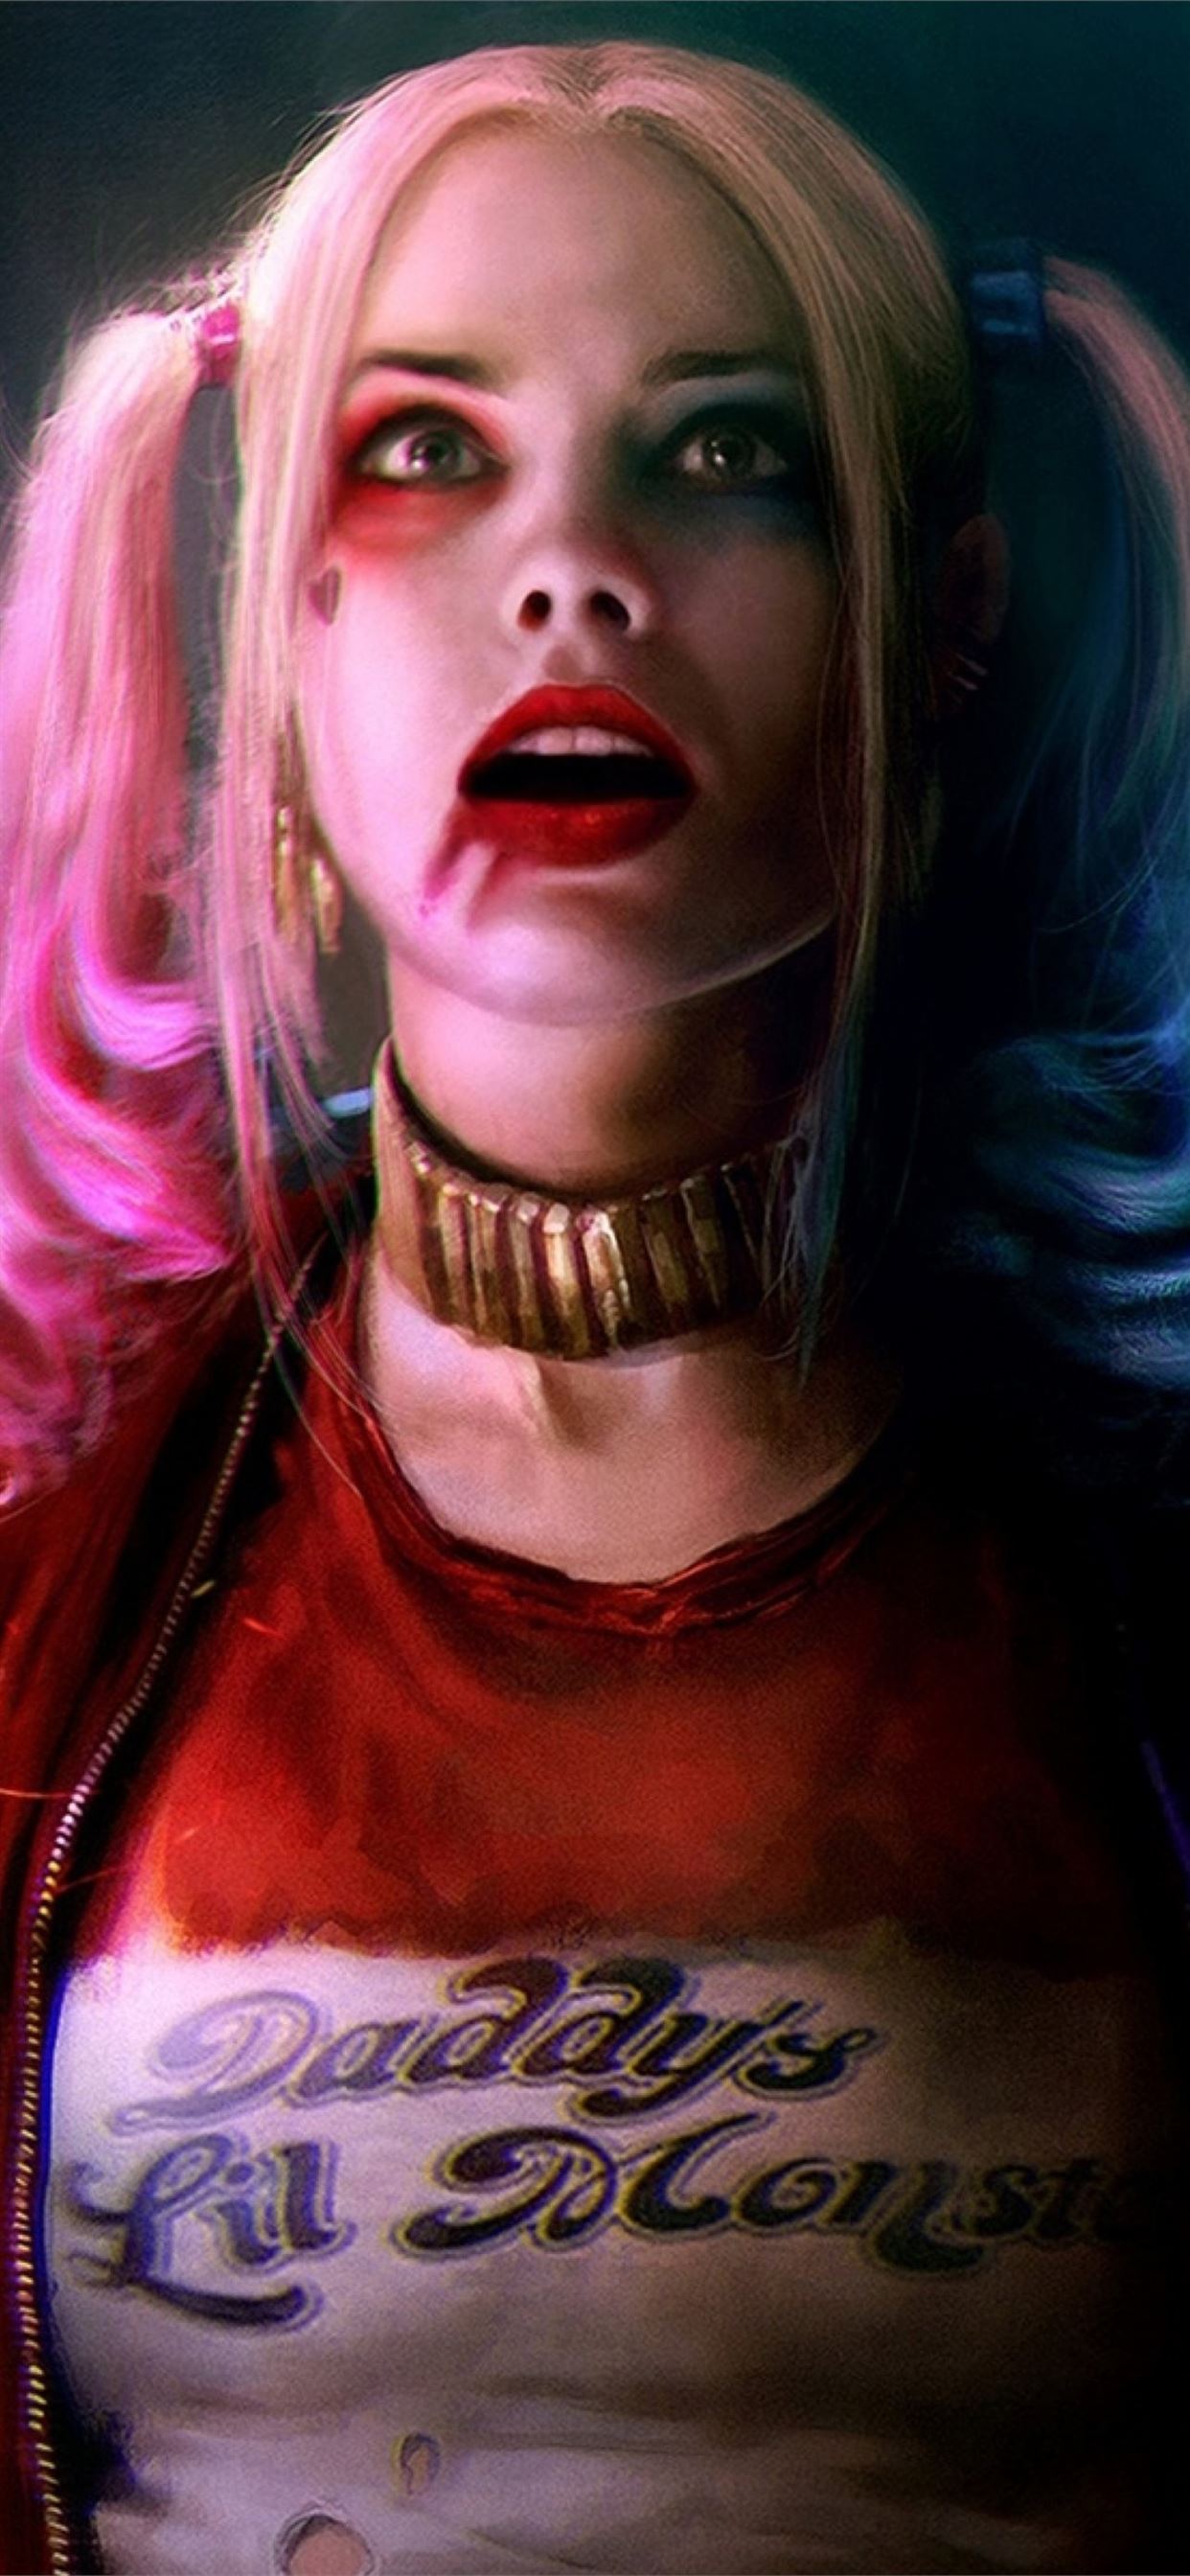 Harley Quinn Suicide Squad Margot Robbie for Samsu... iPhone Wallpapers  Free Download